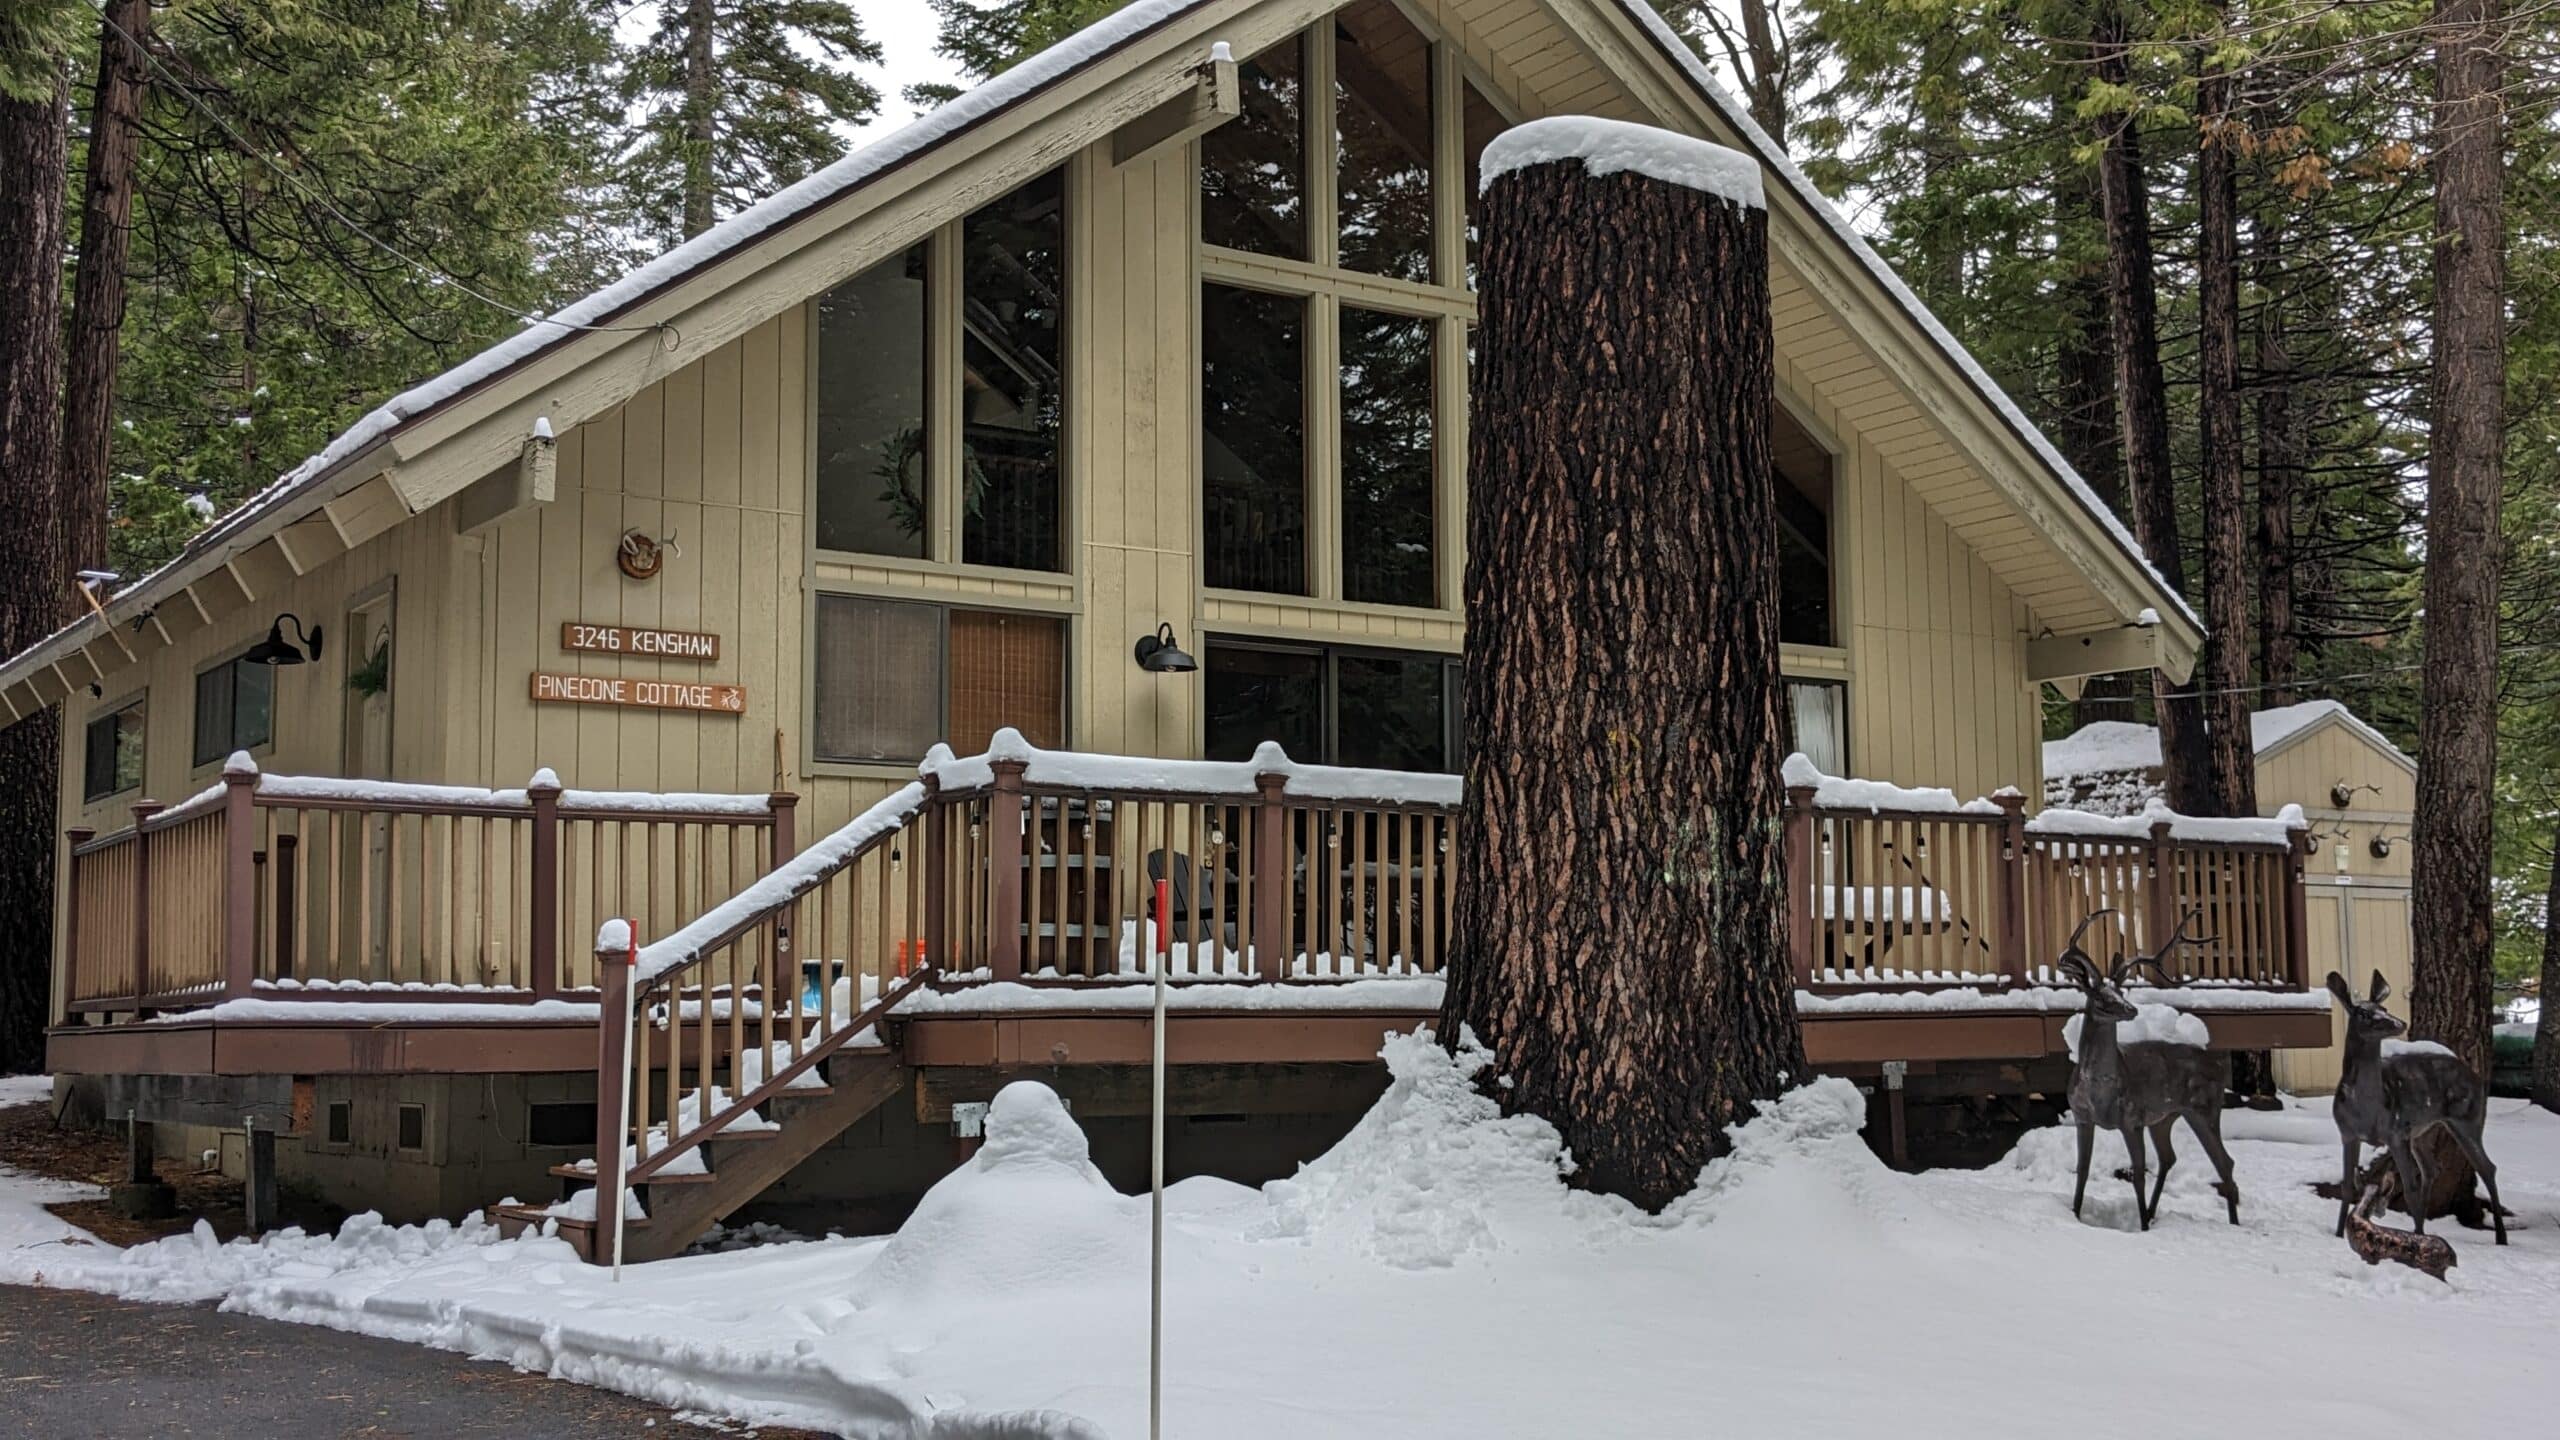 Dorrington Vacation Rental Cabins - A cozy cabin in the woods with evergreen trees and snow on the ground.